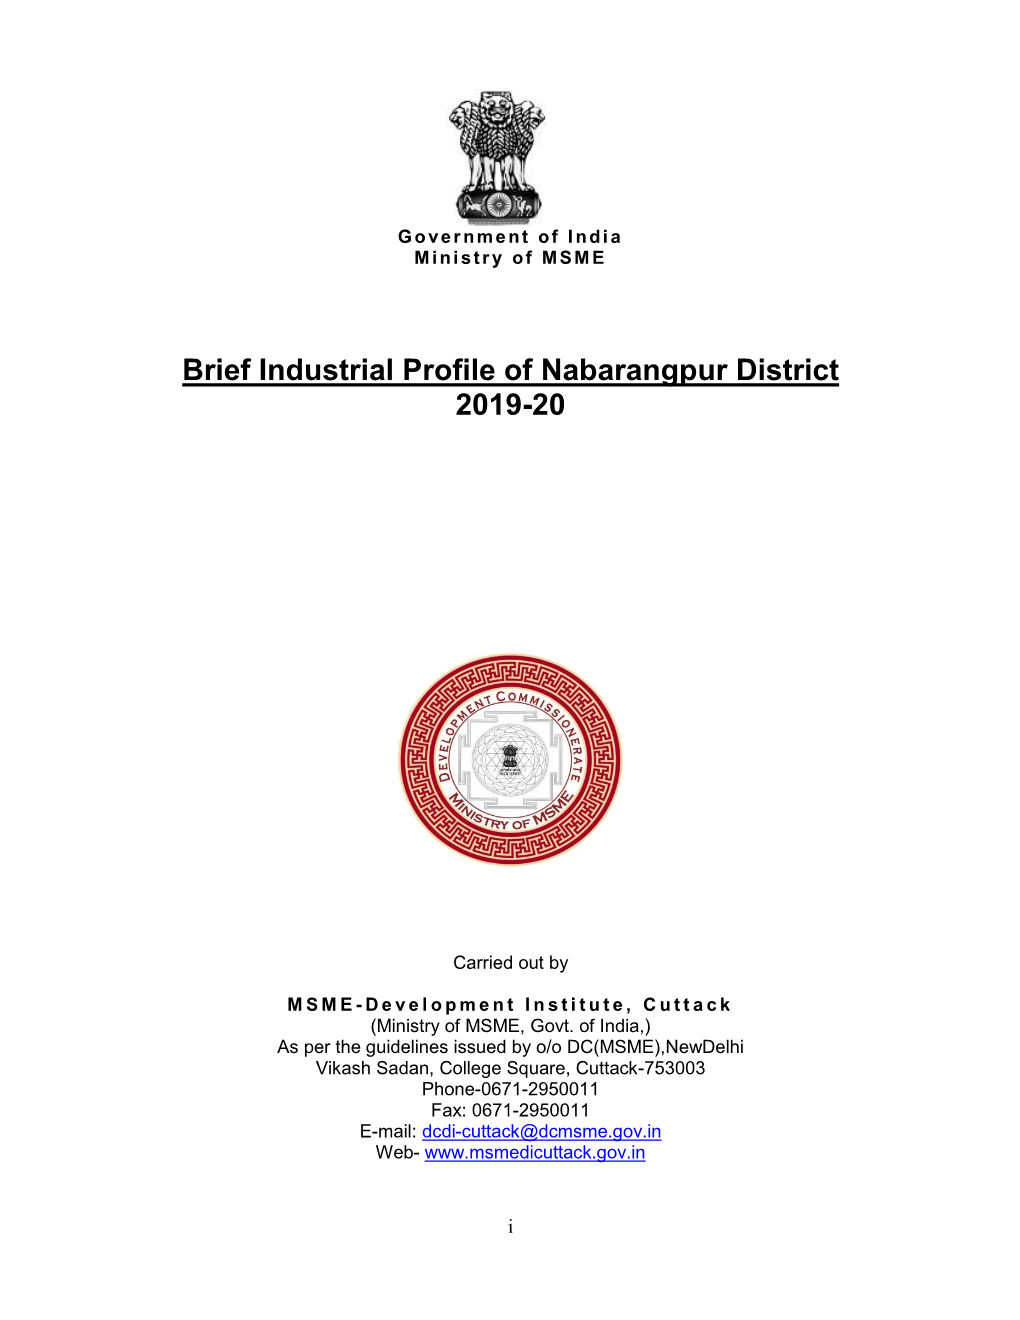 Brief Industrial Profile of Nabarangpur District 2019-20